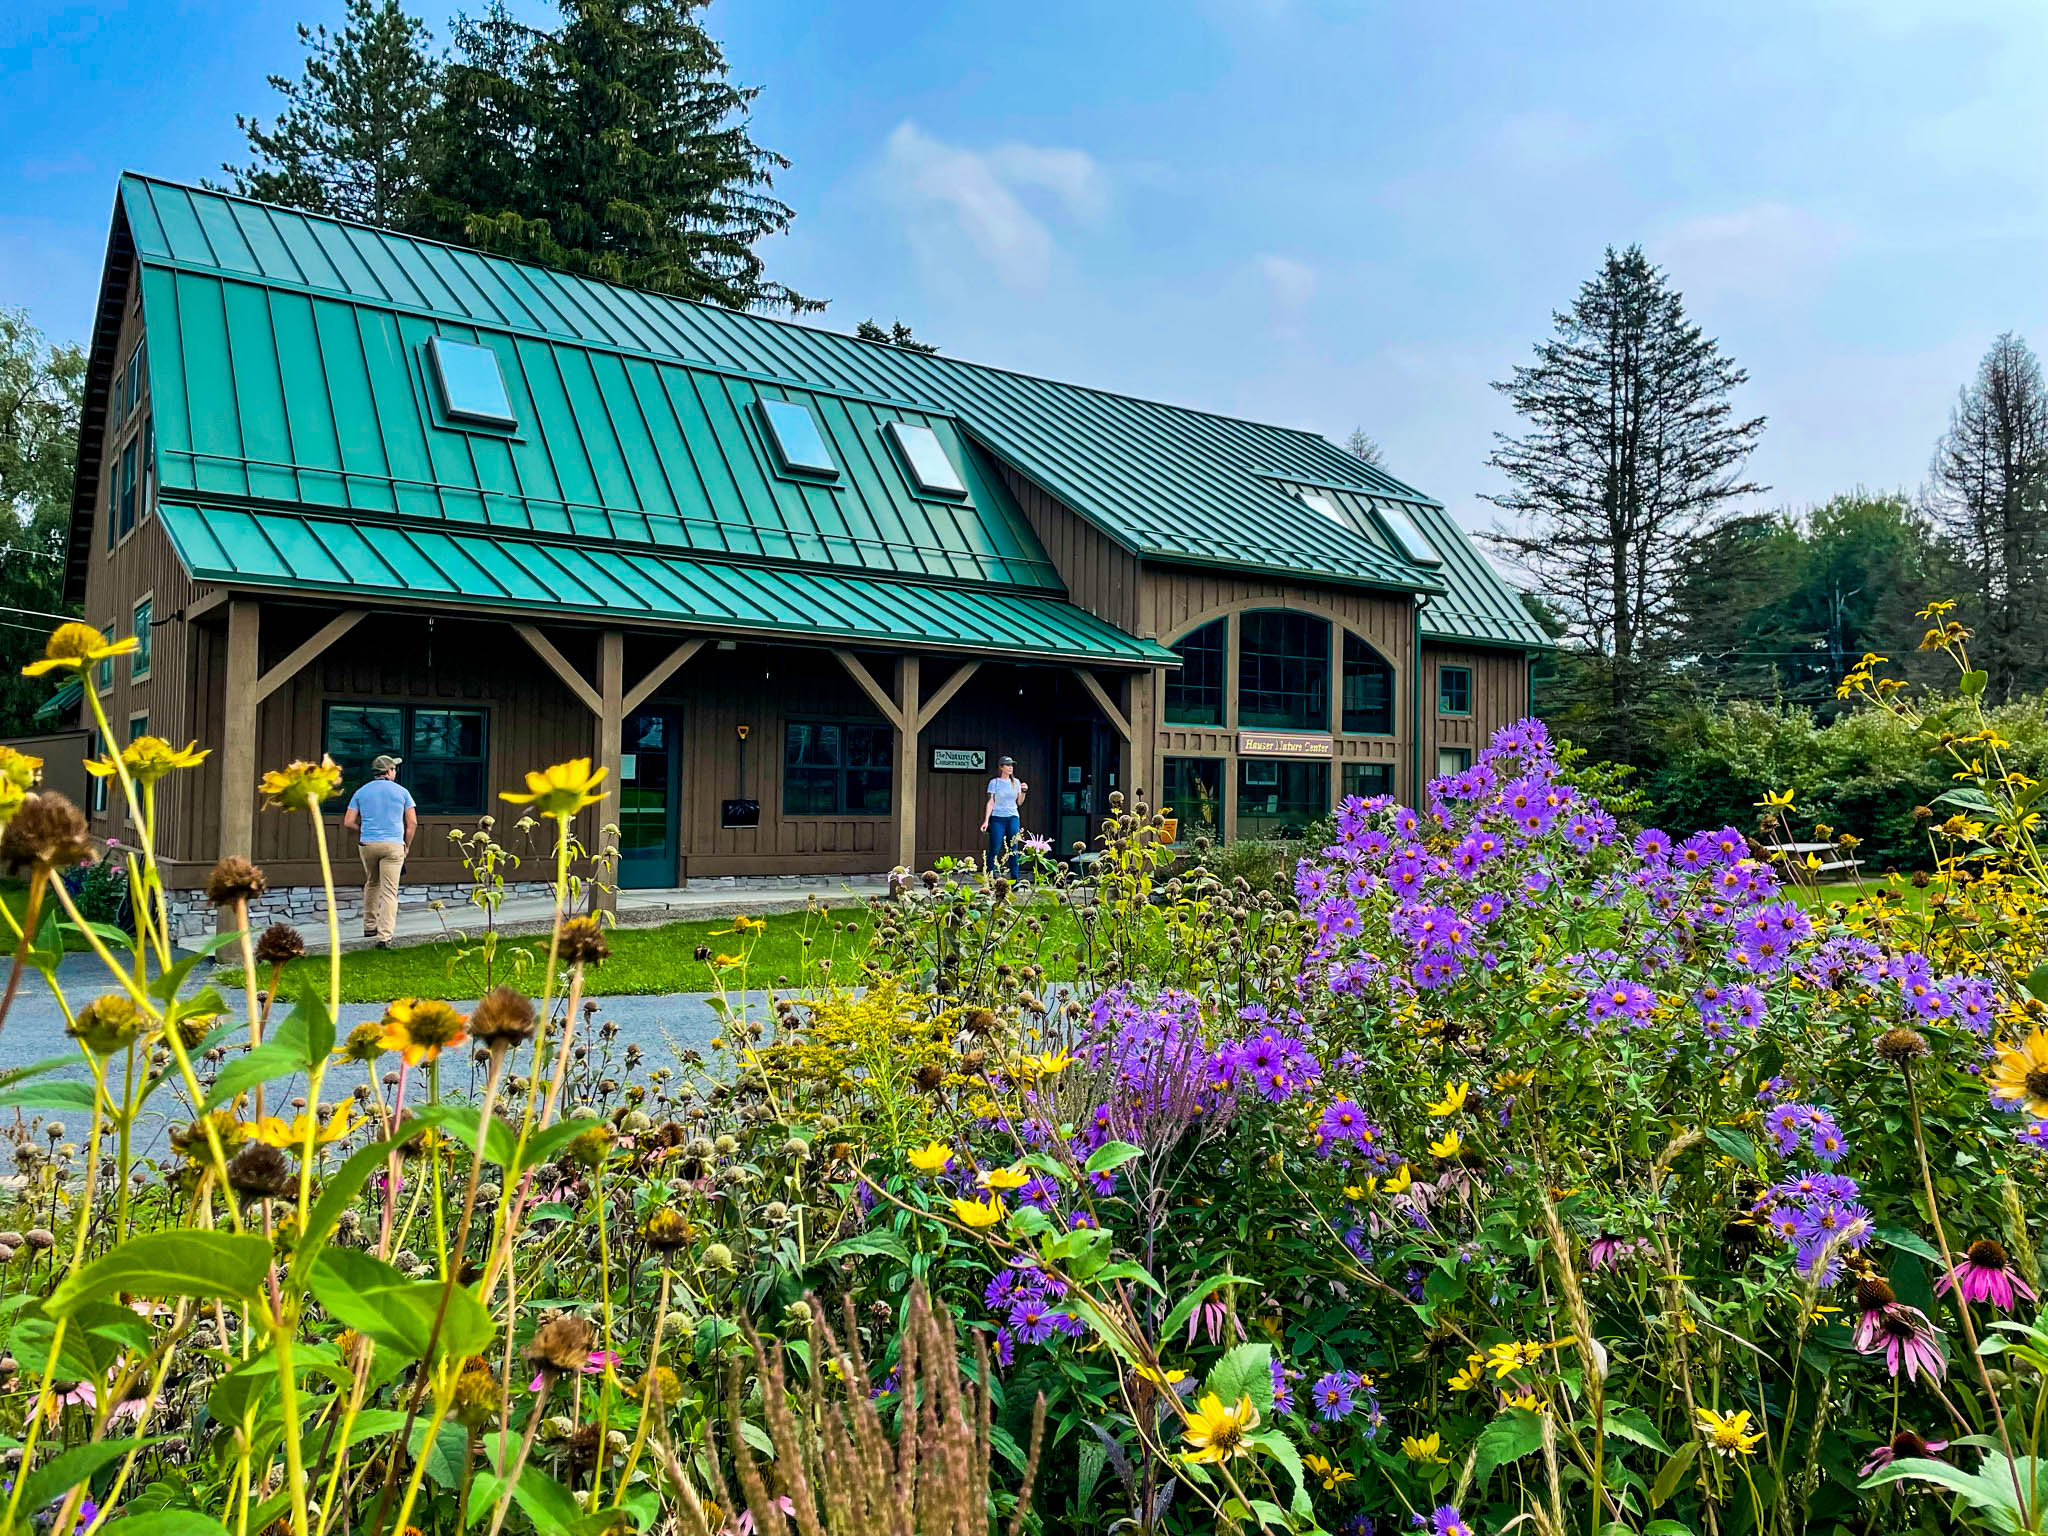 A colorful pollinator garden sits in front of a brown barn with a green roof.